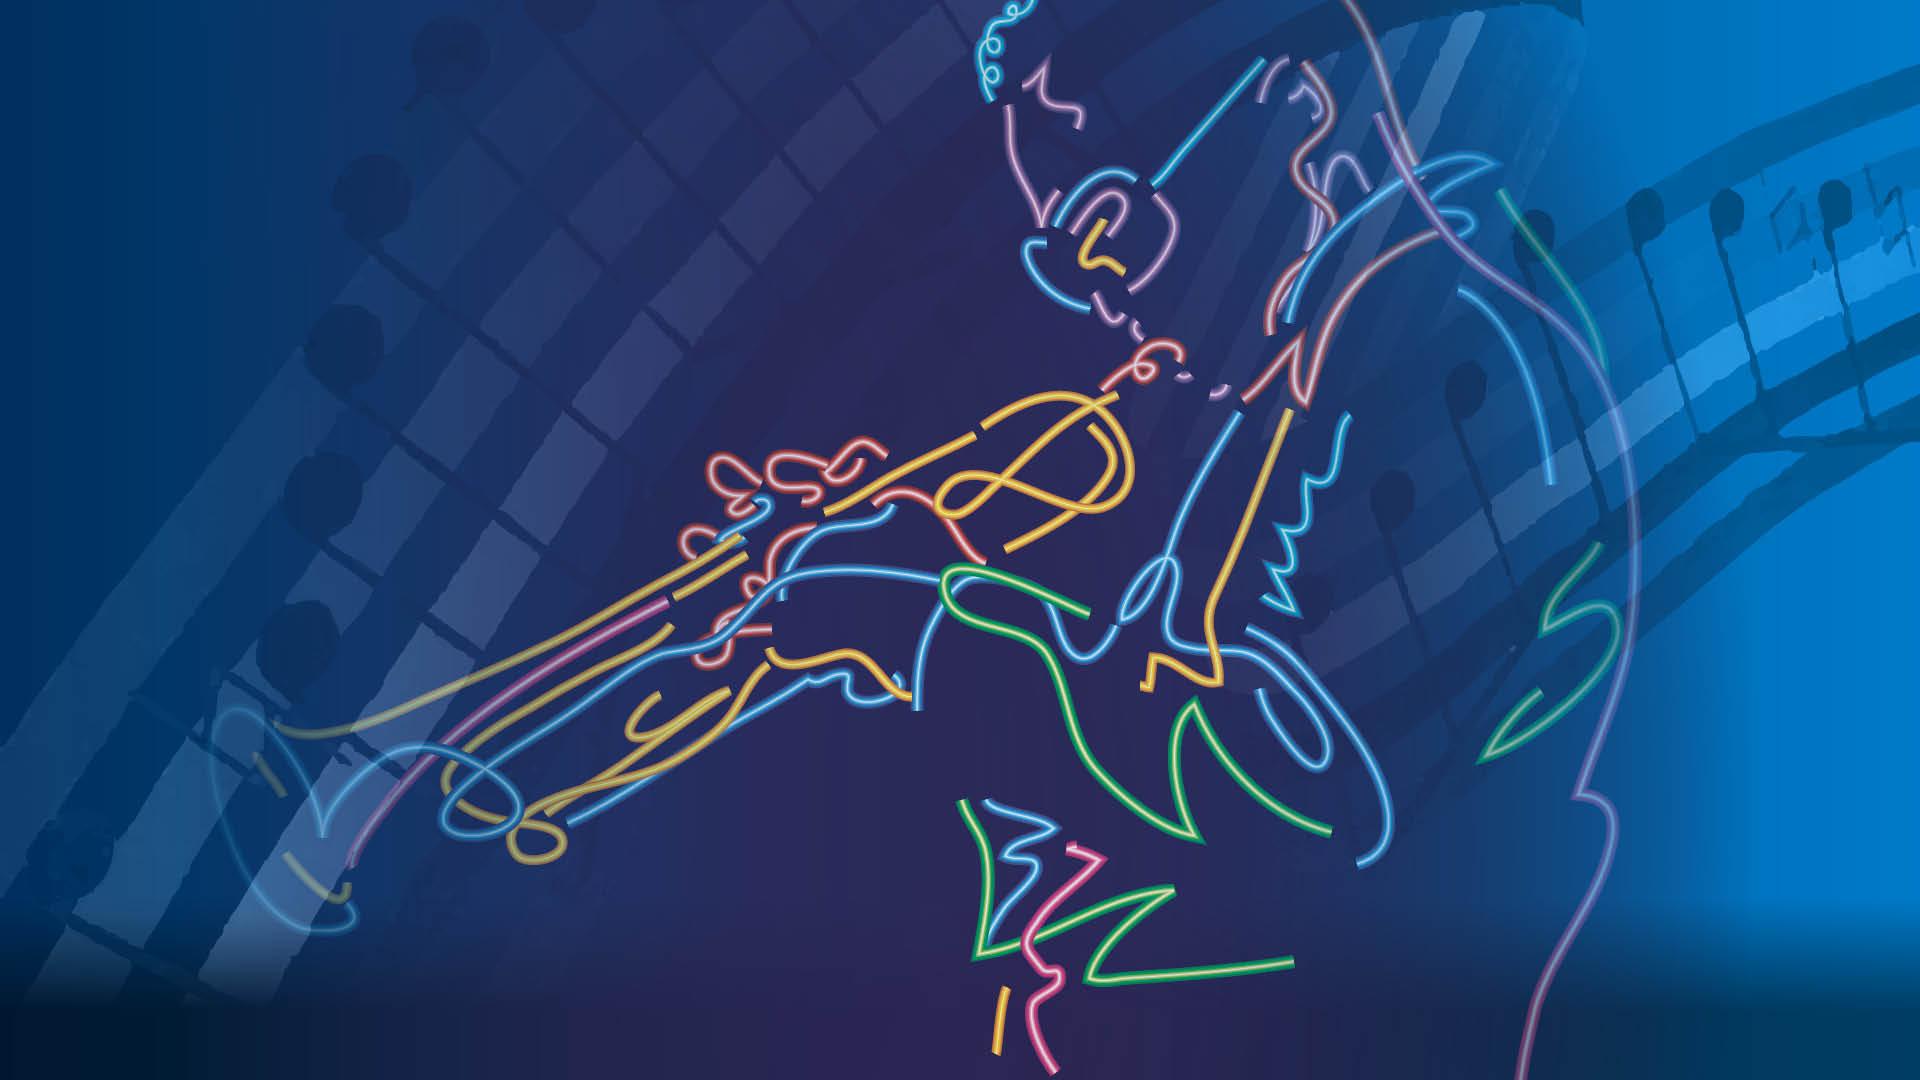 neon outline gesture drawing of a trumpet player with sunglasses on, a ribbon of music notes waving in the background